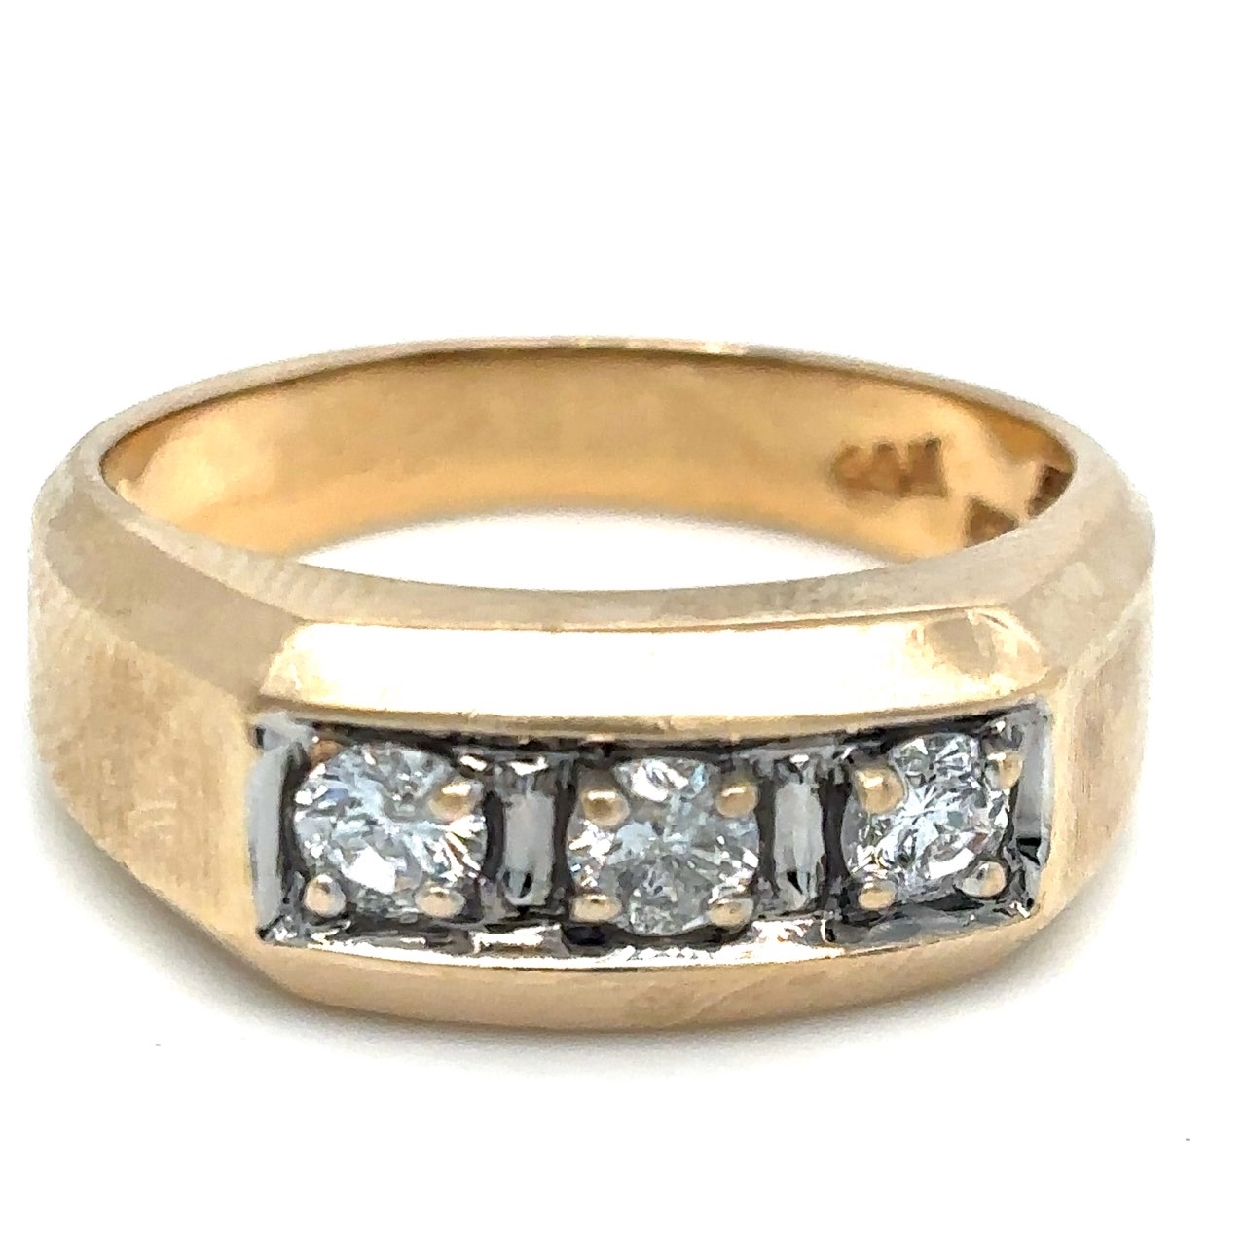 14K Two Tone Gold Ring with .5cttw Round Diamonds 

Size 8.75